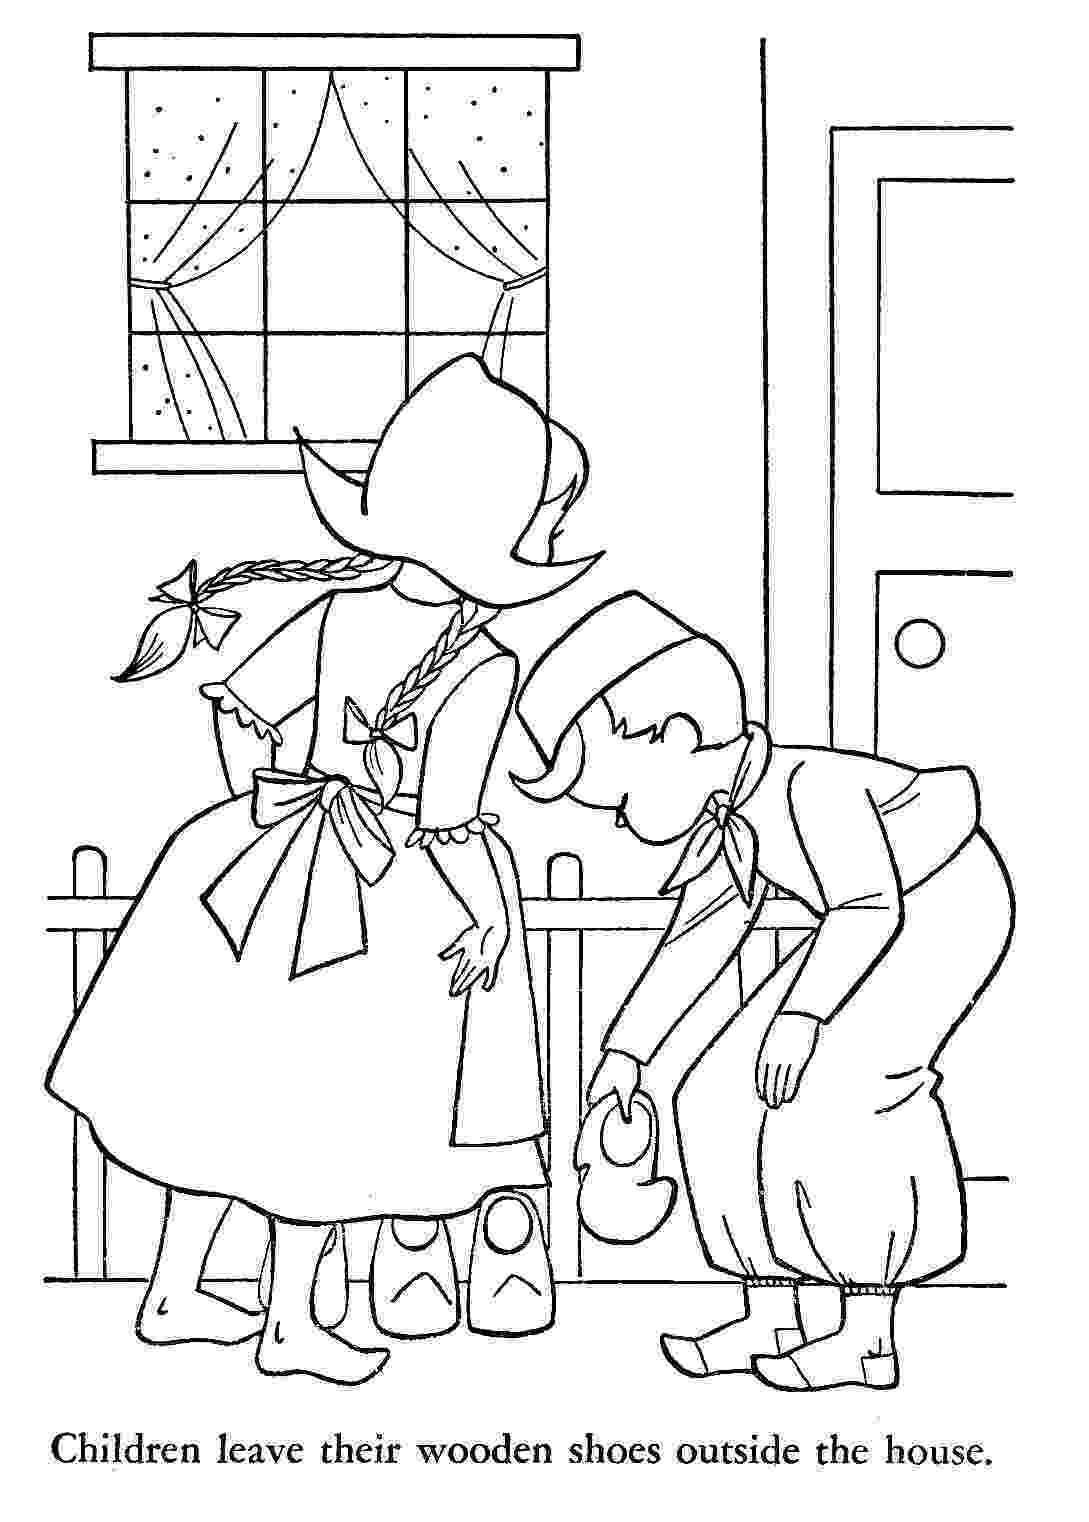 coloring page book children of other lands coloring book 1954 q is for quilter book coloring page 